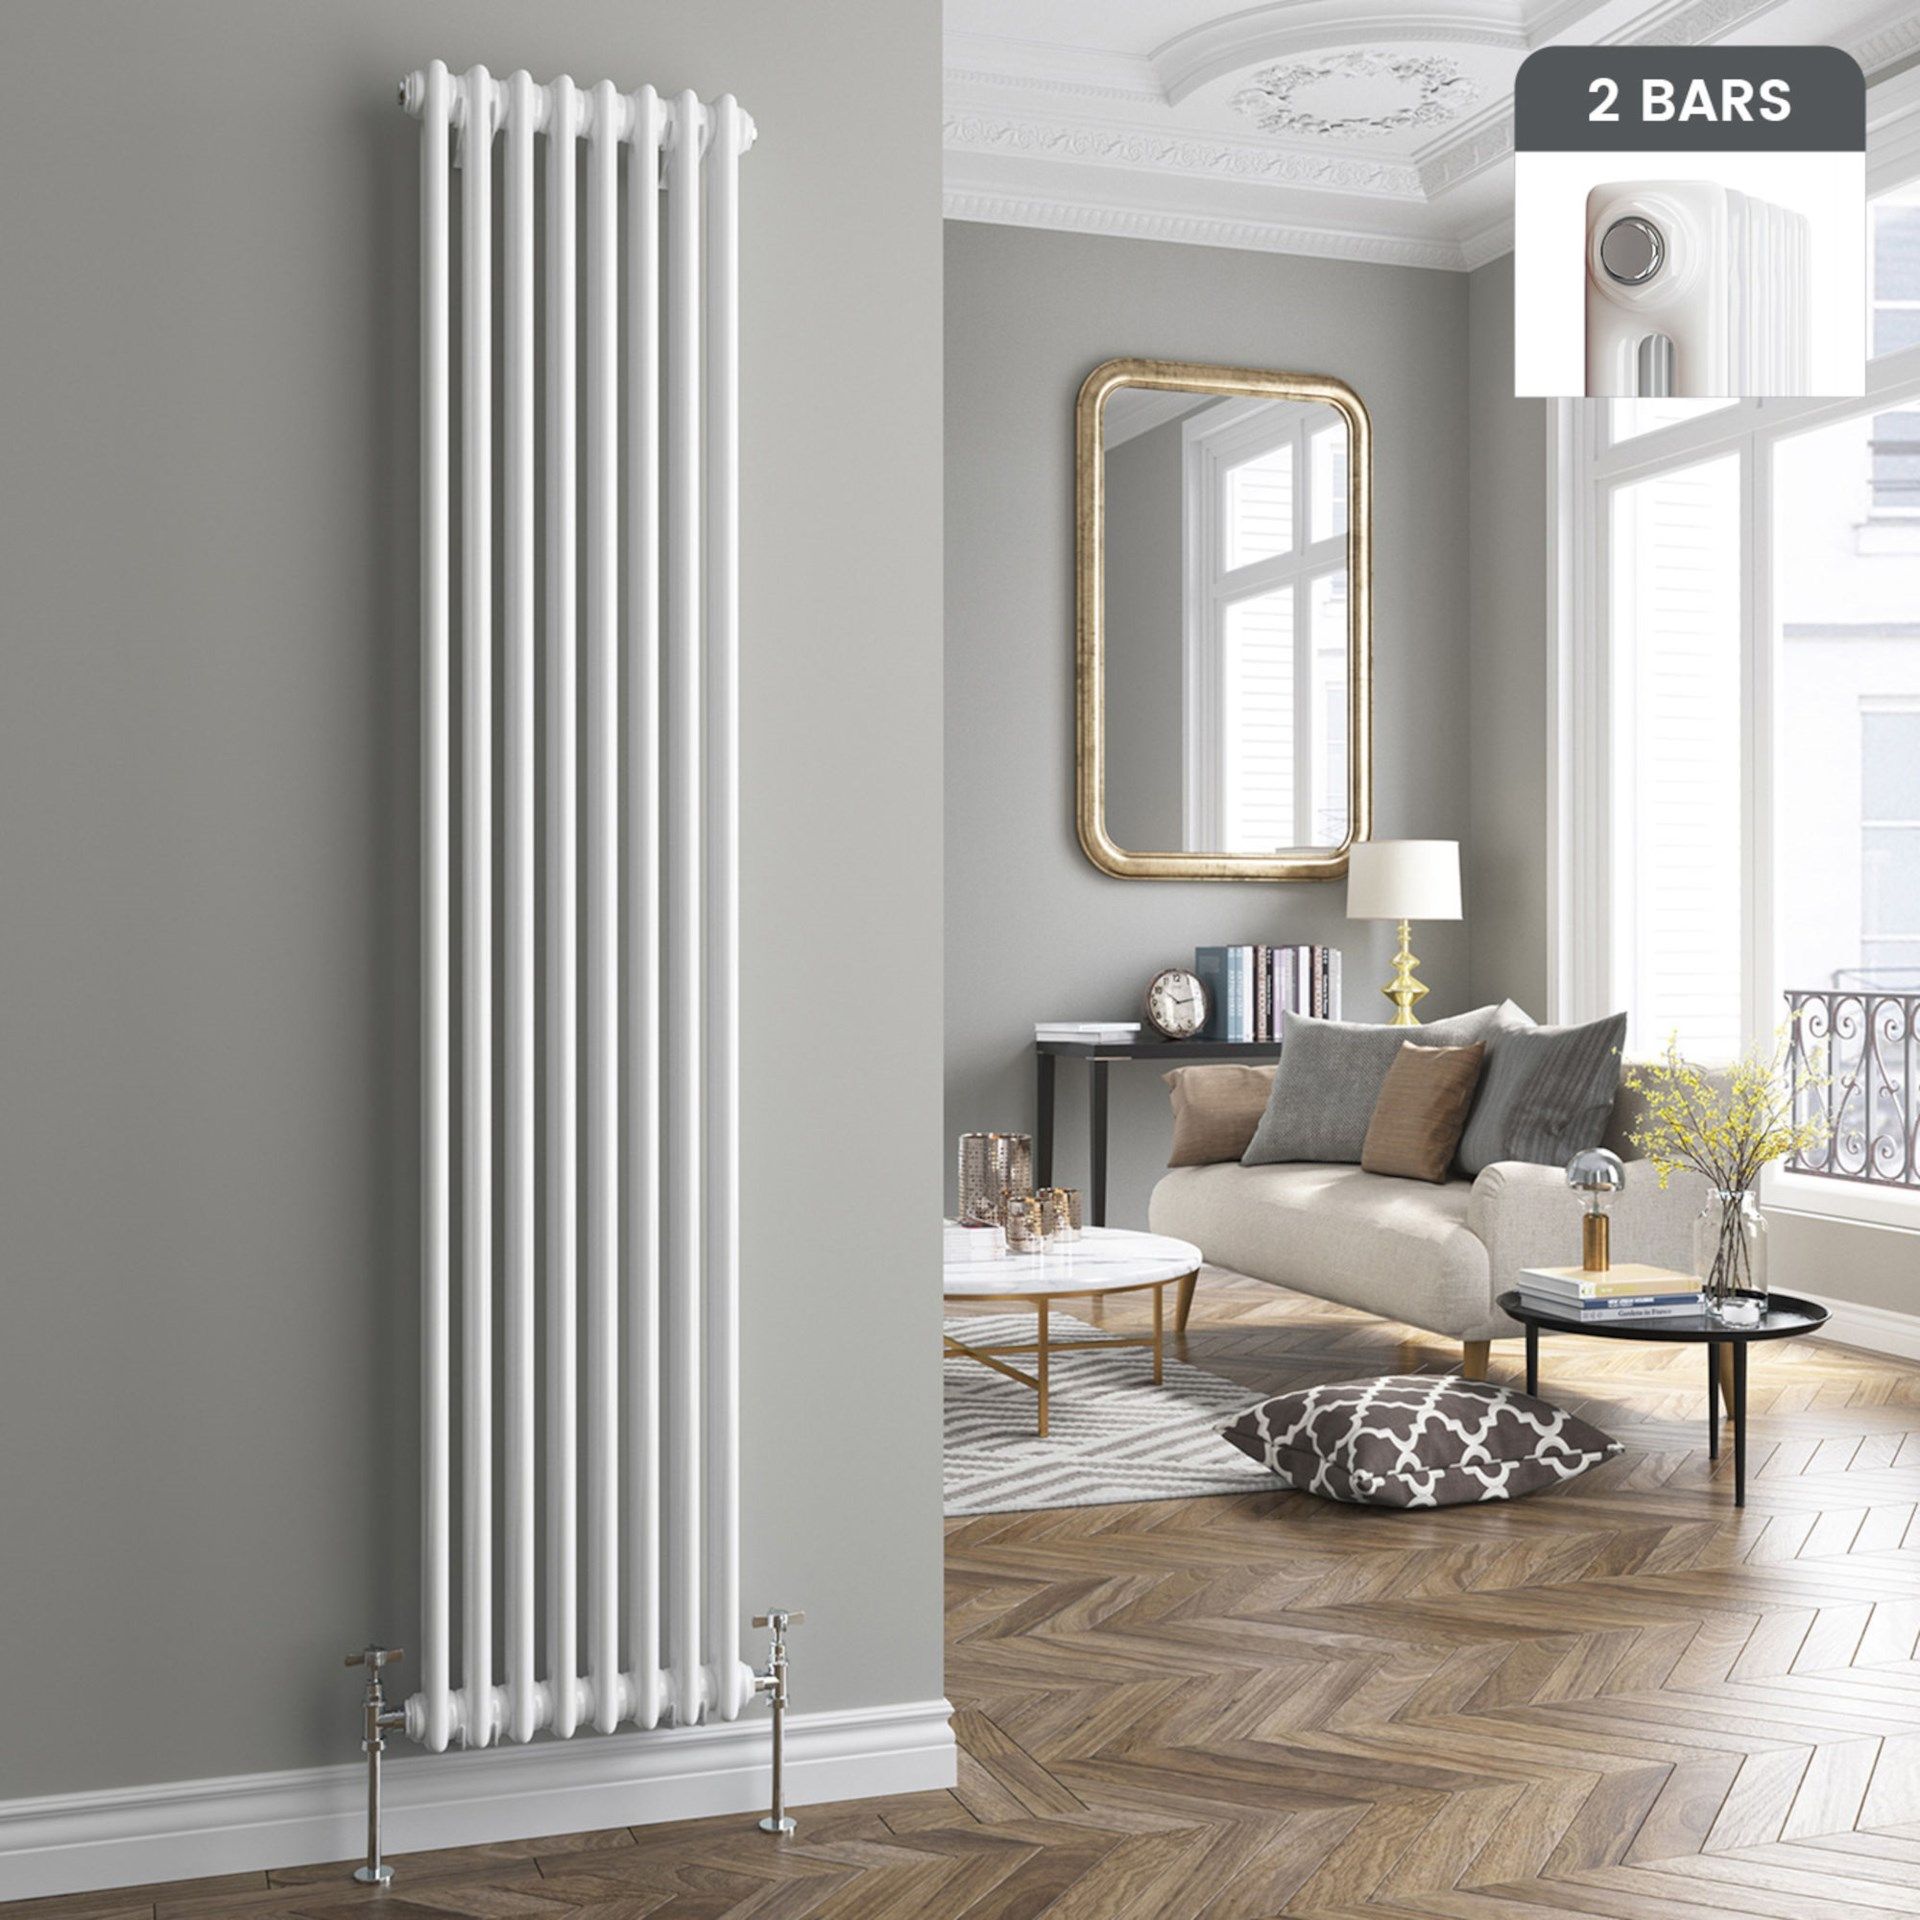 (RR86) 2000x490mm White Double Panel Vertical Colosseum Traditional Radiator. RRP £479.99.For... - Image 3 of 3